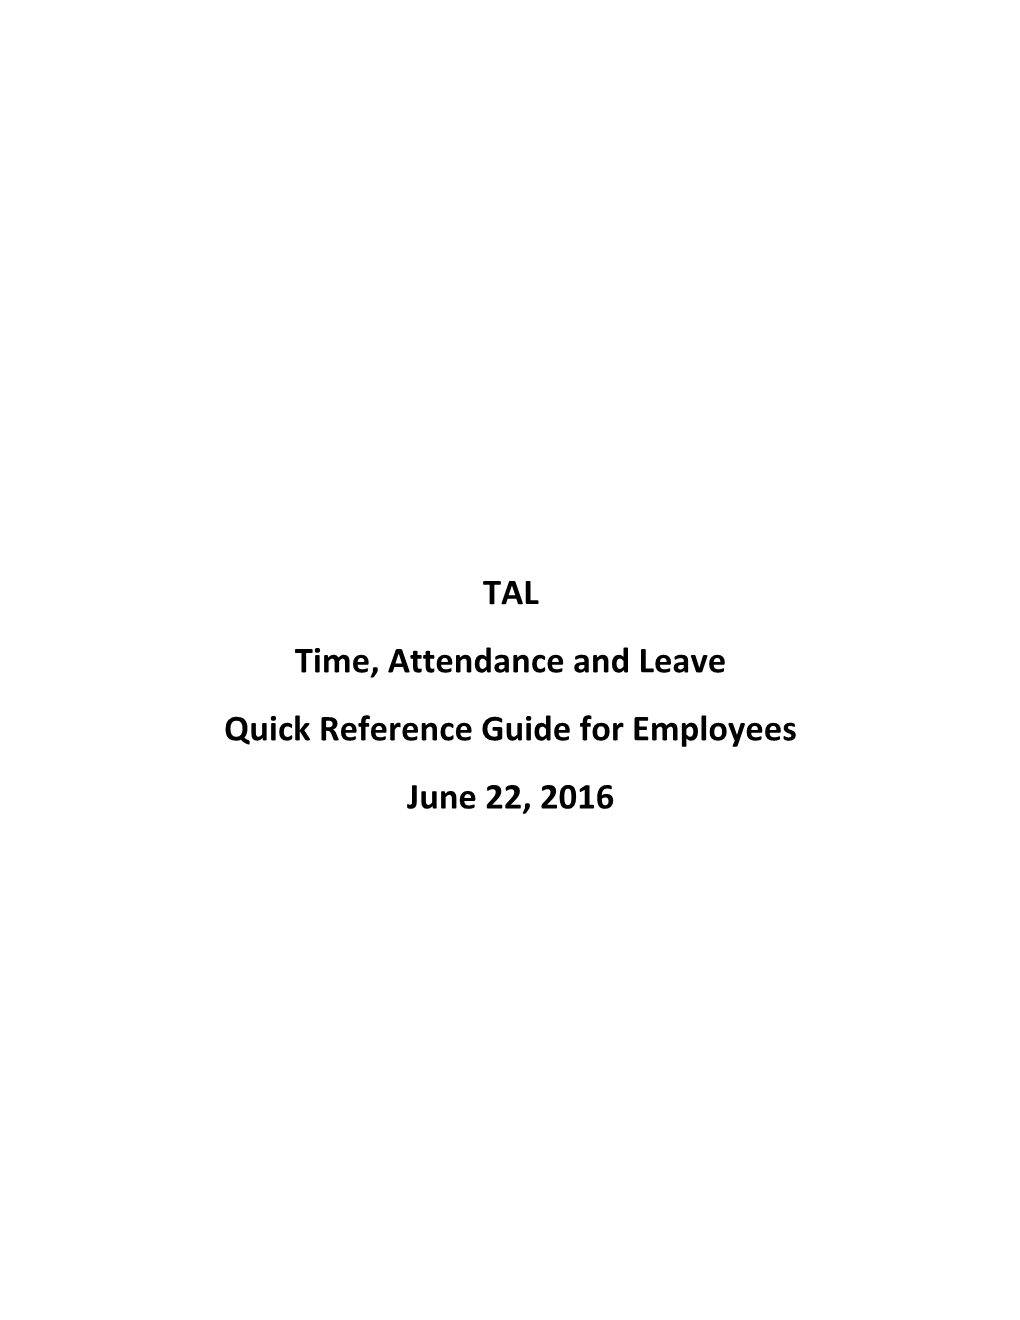 Time, Attendance and Leave